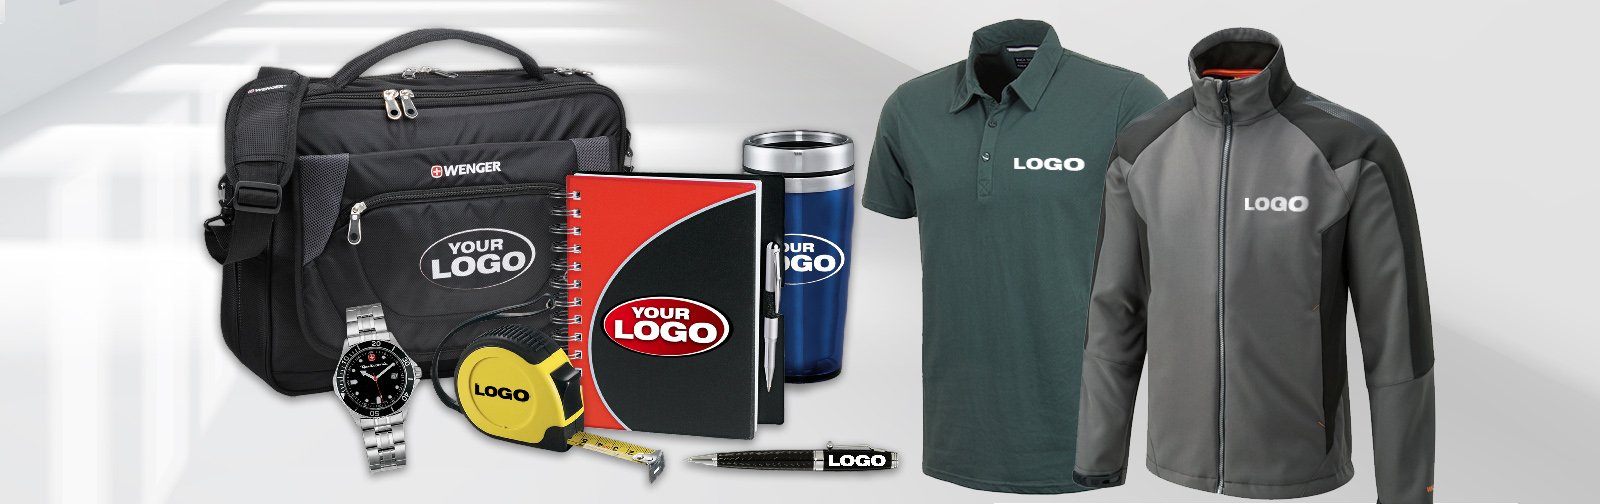 Promotional shirts, cups, bags and more